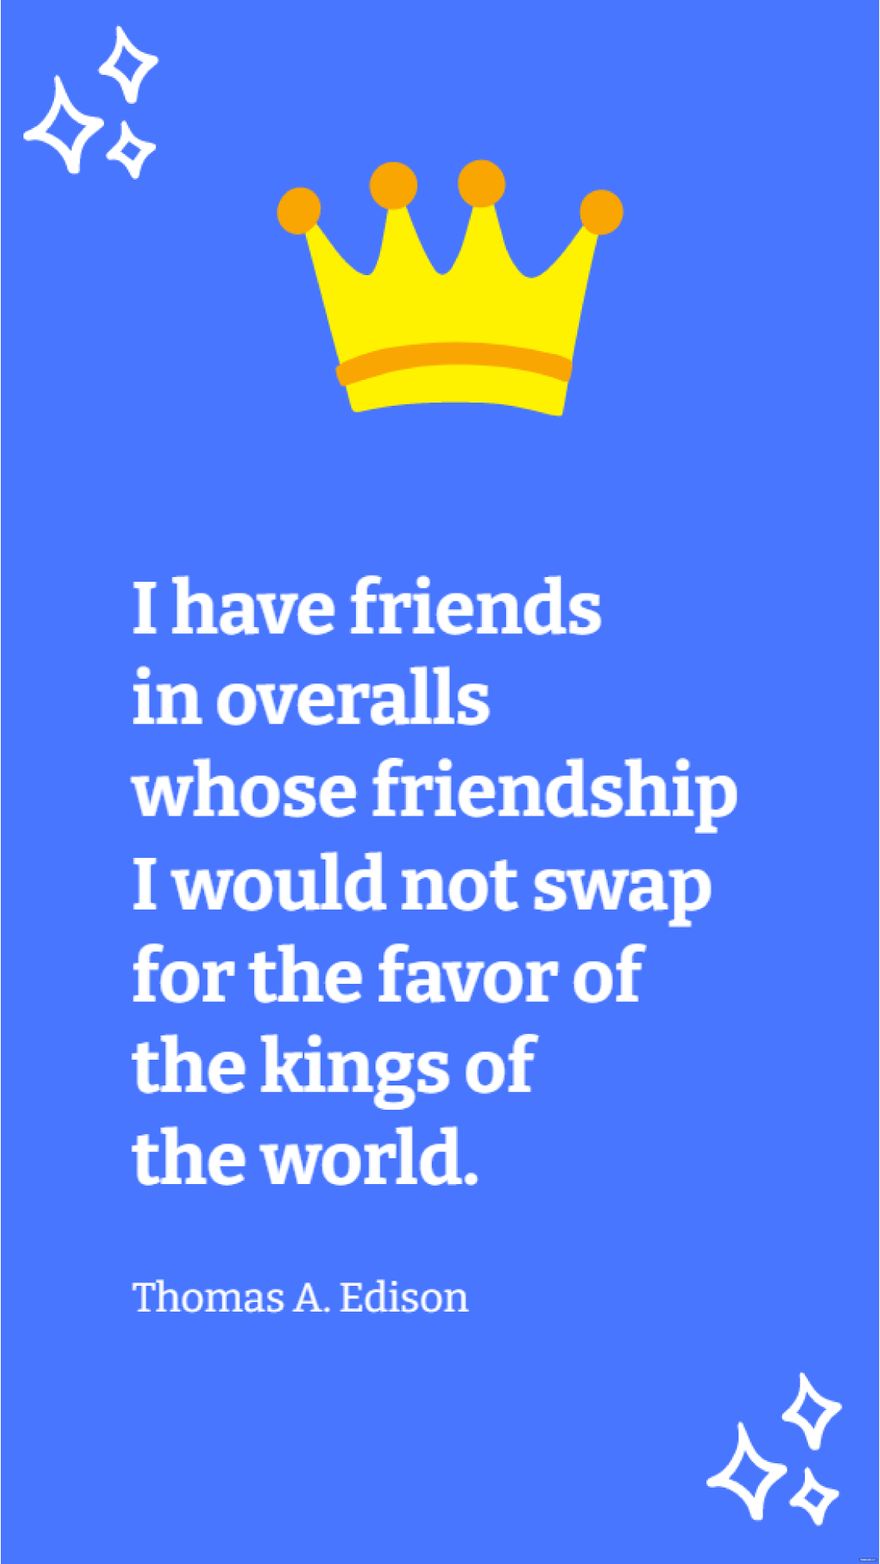 Thomas A. Edison - I have friends in overalls whose friendship I would not swap for the favor of the kings of the world.